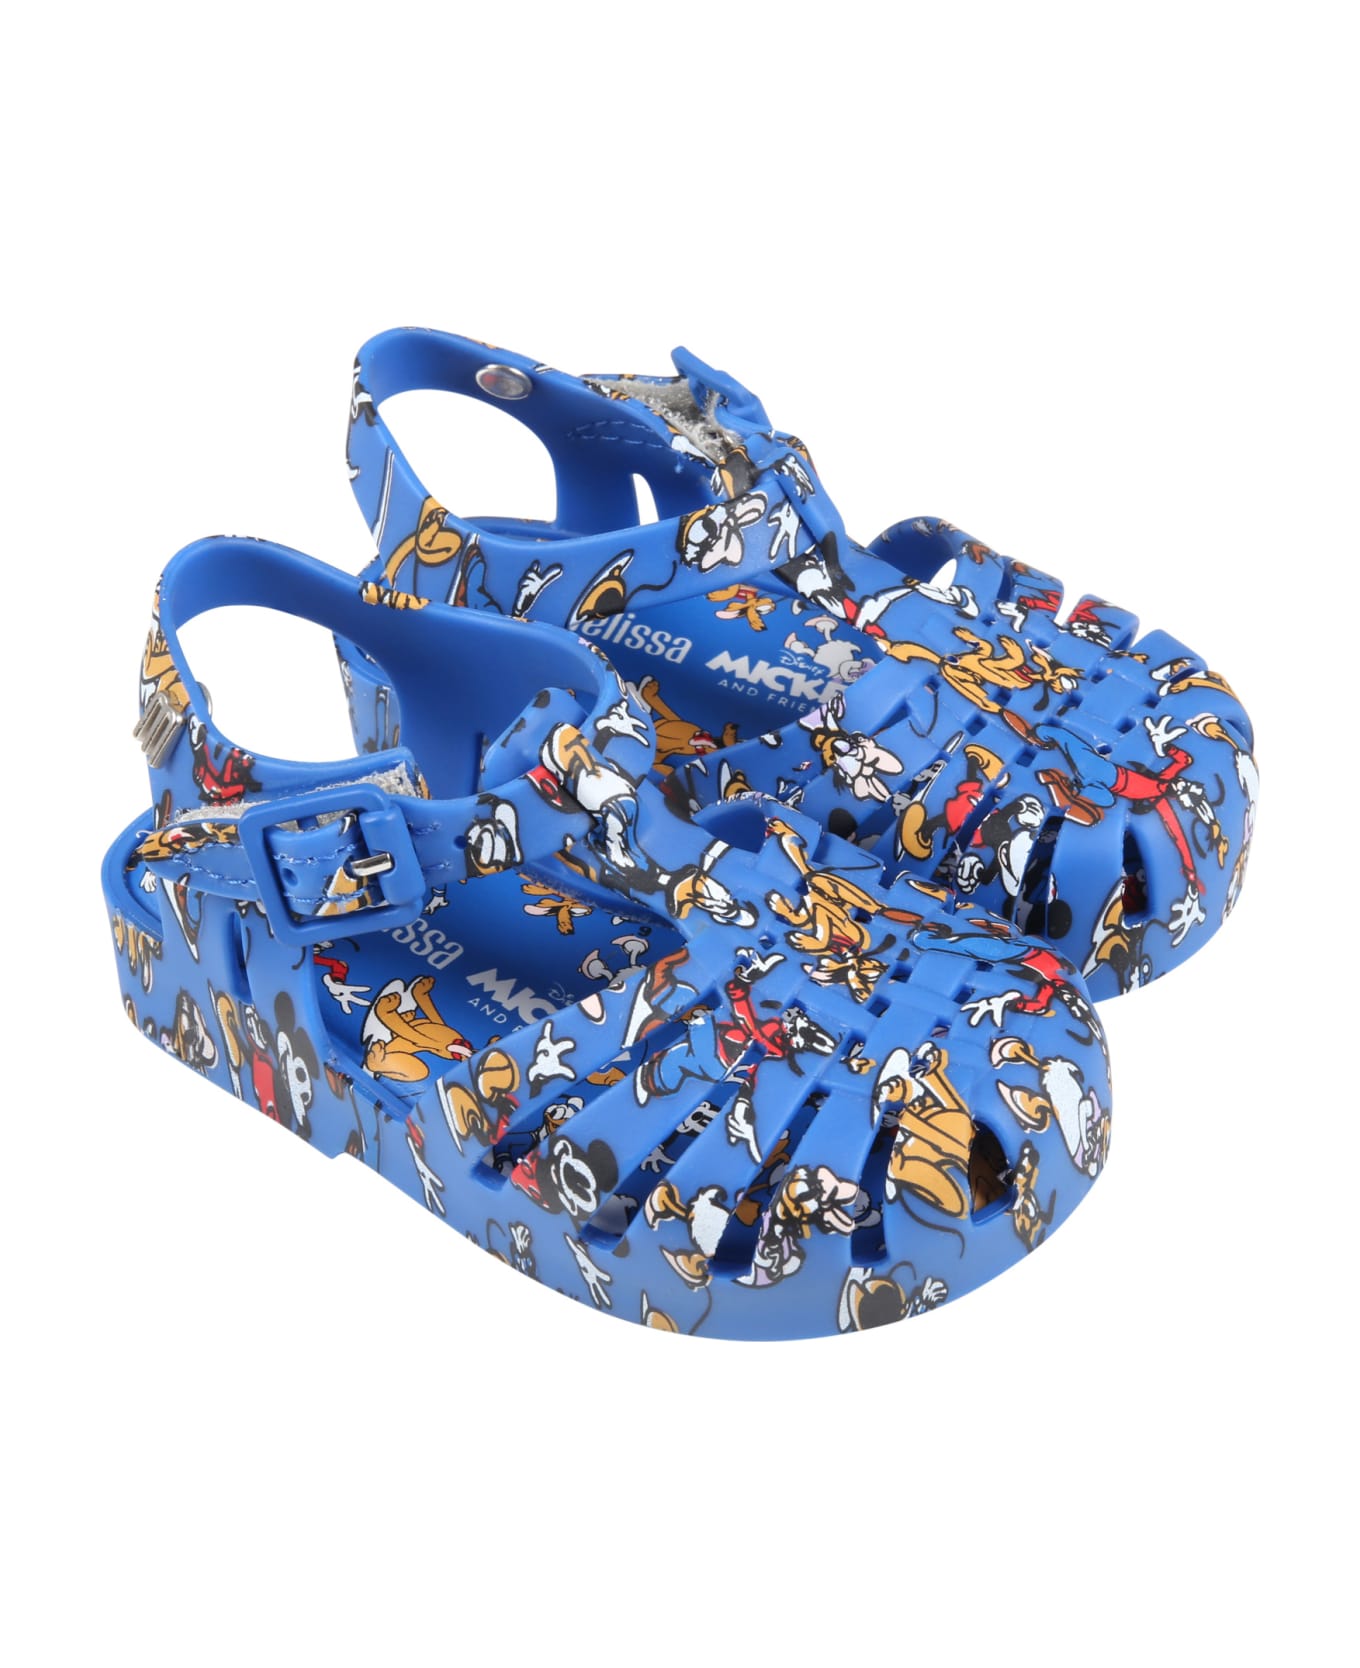 Melissa Blue Sandals For Boy With Disney Characters - Blue